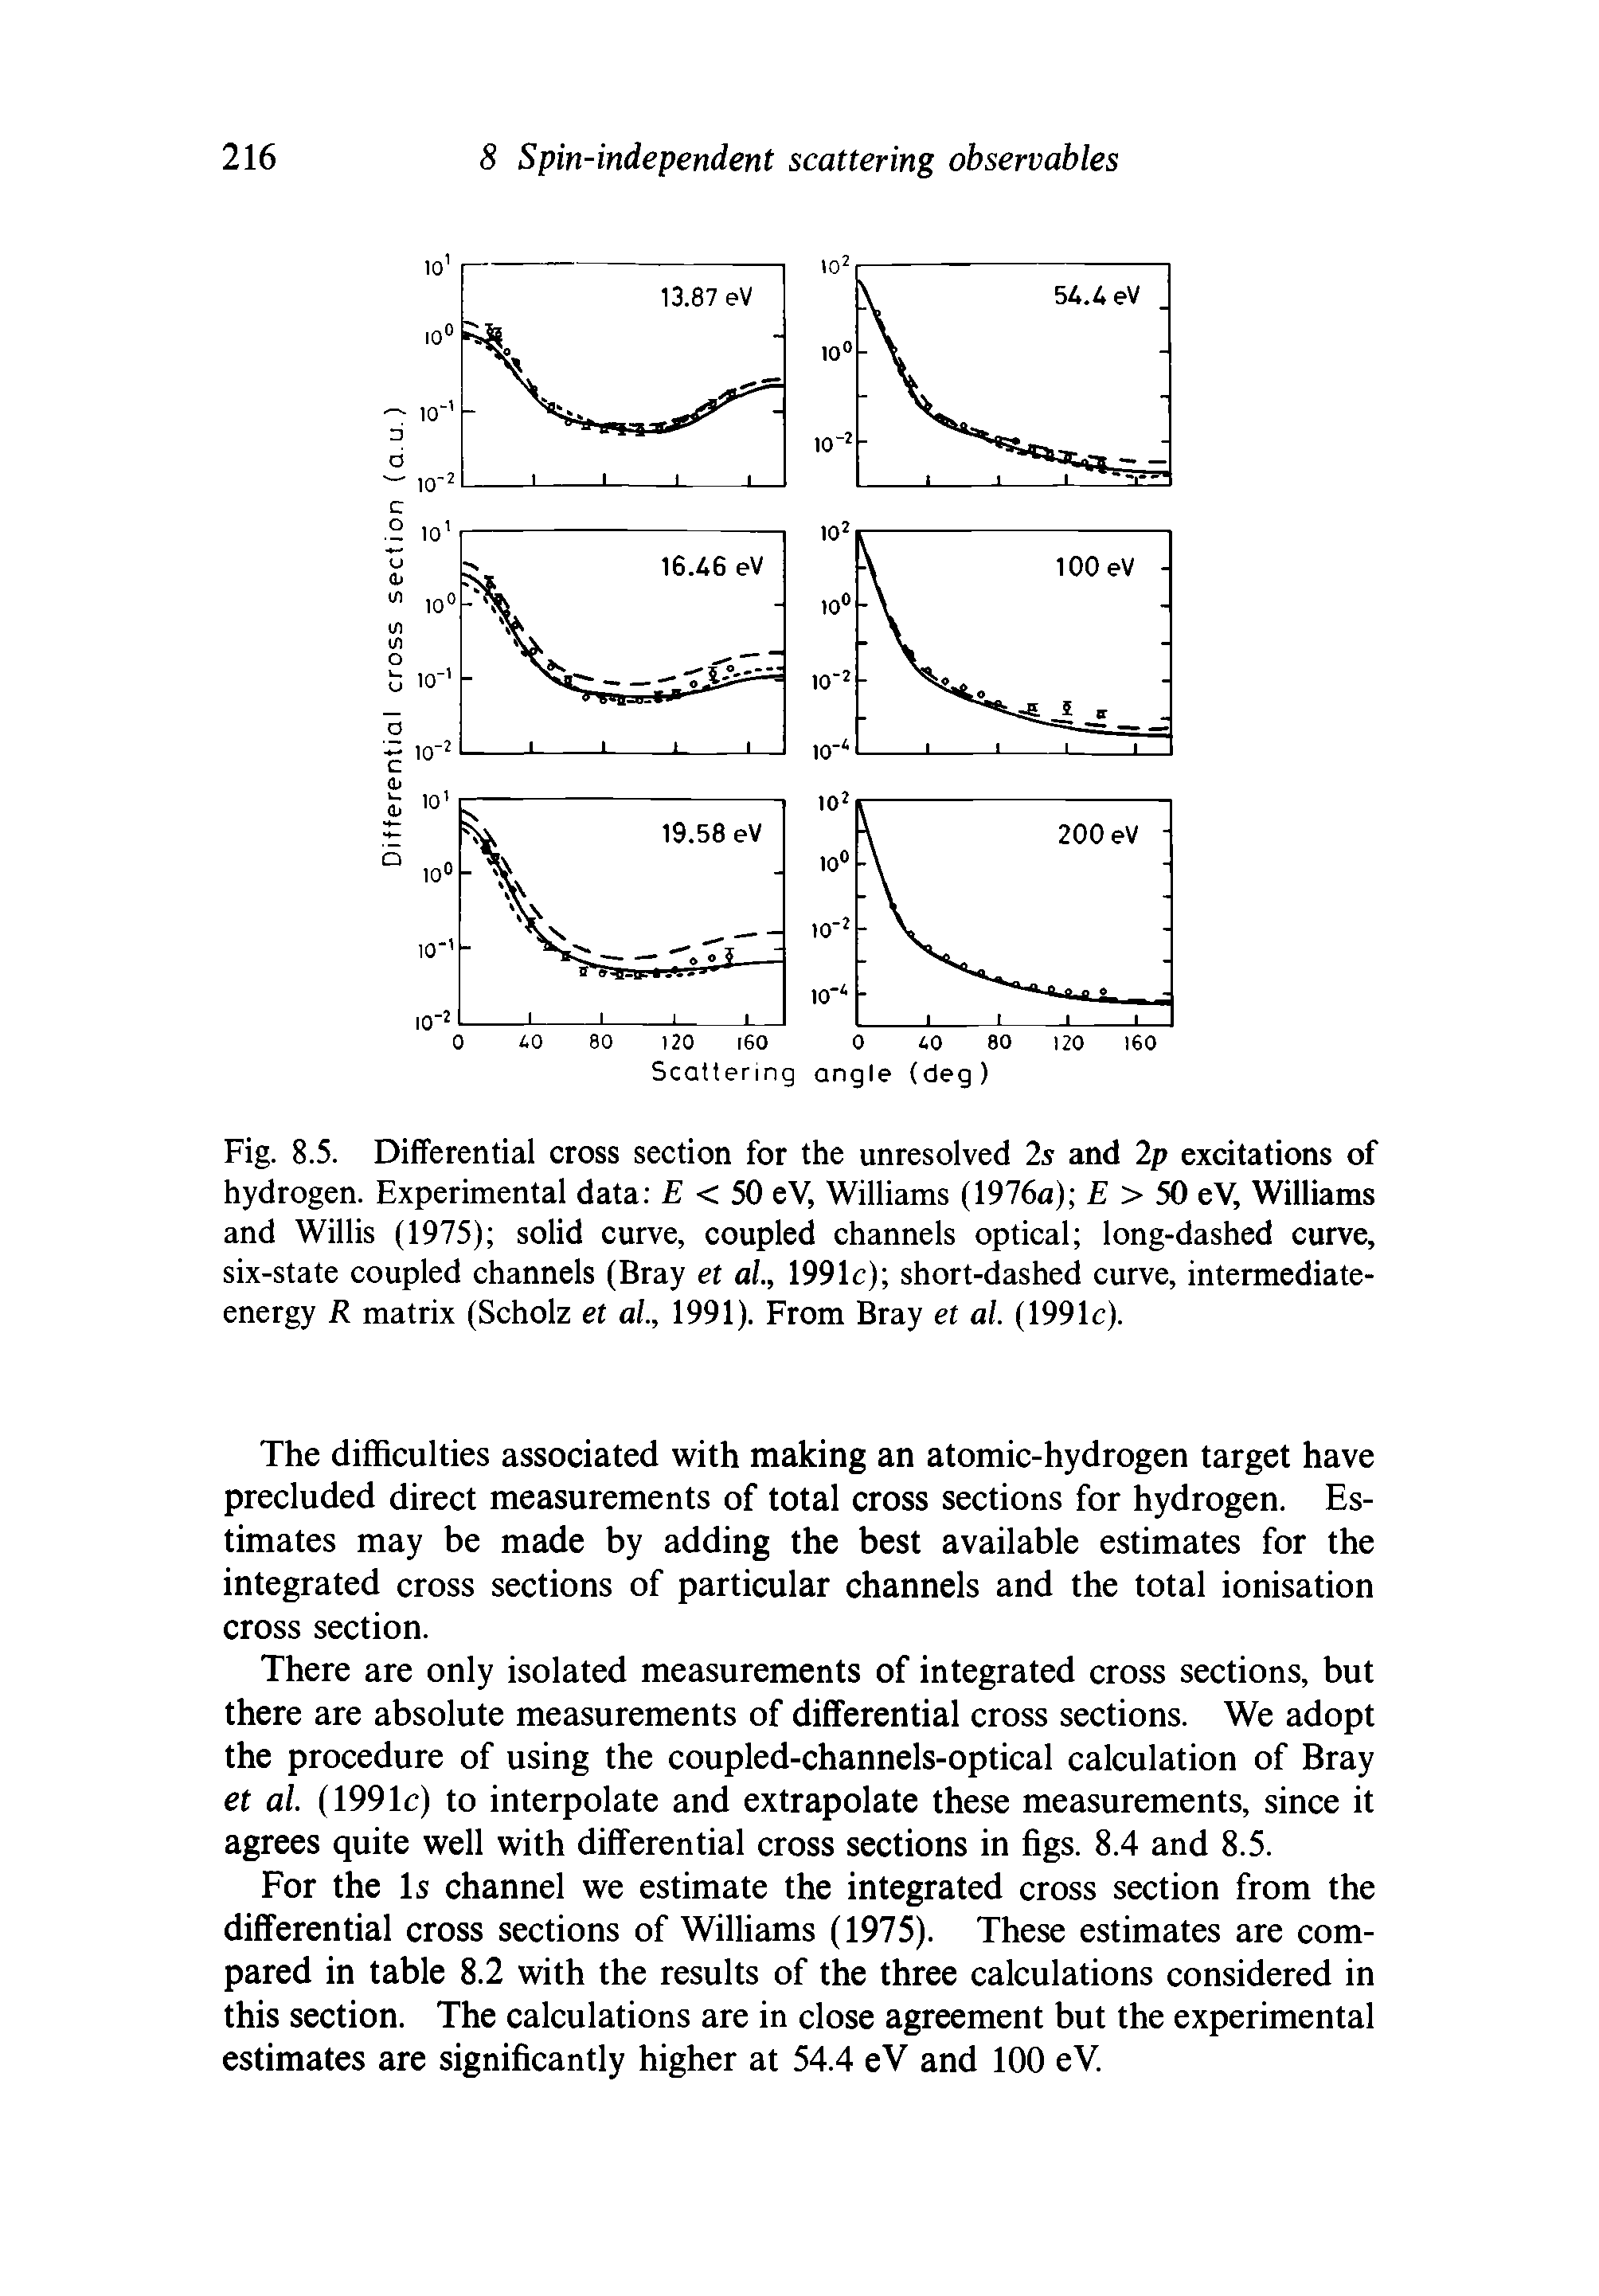 Fig. 8.5. Differential cross section for the unresolved 2s and 2p excitations of hydrogen. Experimental data E < 50 eV, Williams (1976a) > 50 eV, Williams and Willis (1975) solid curve, coupled channels optical long-dashed curve, six-state coupled channels (Bray et al, 1991c) short-dashed curve, intermediate-energy R matrix (Scholz et al., 1991). From Bray et al. (1991c).